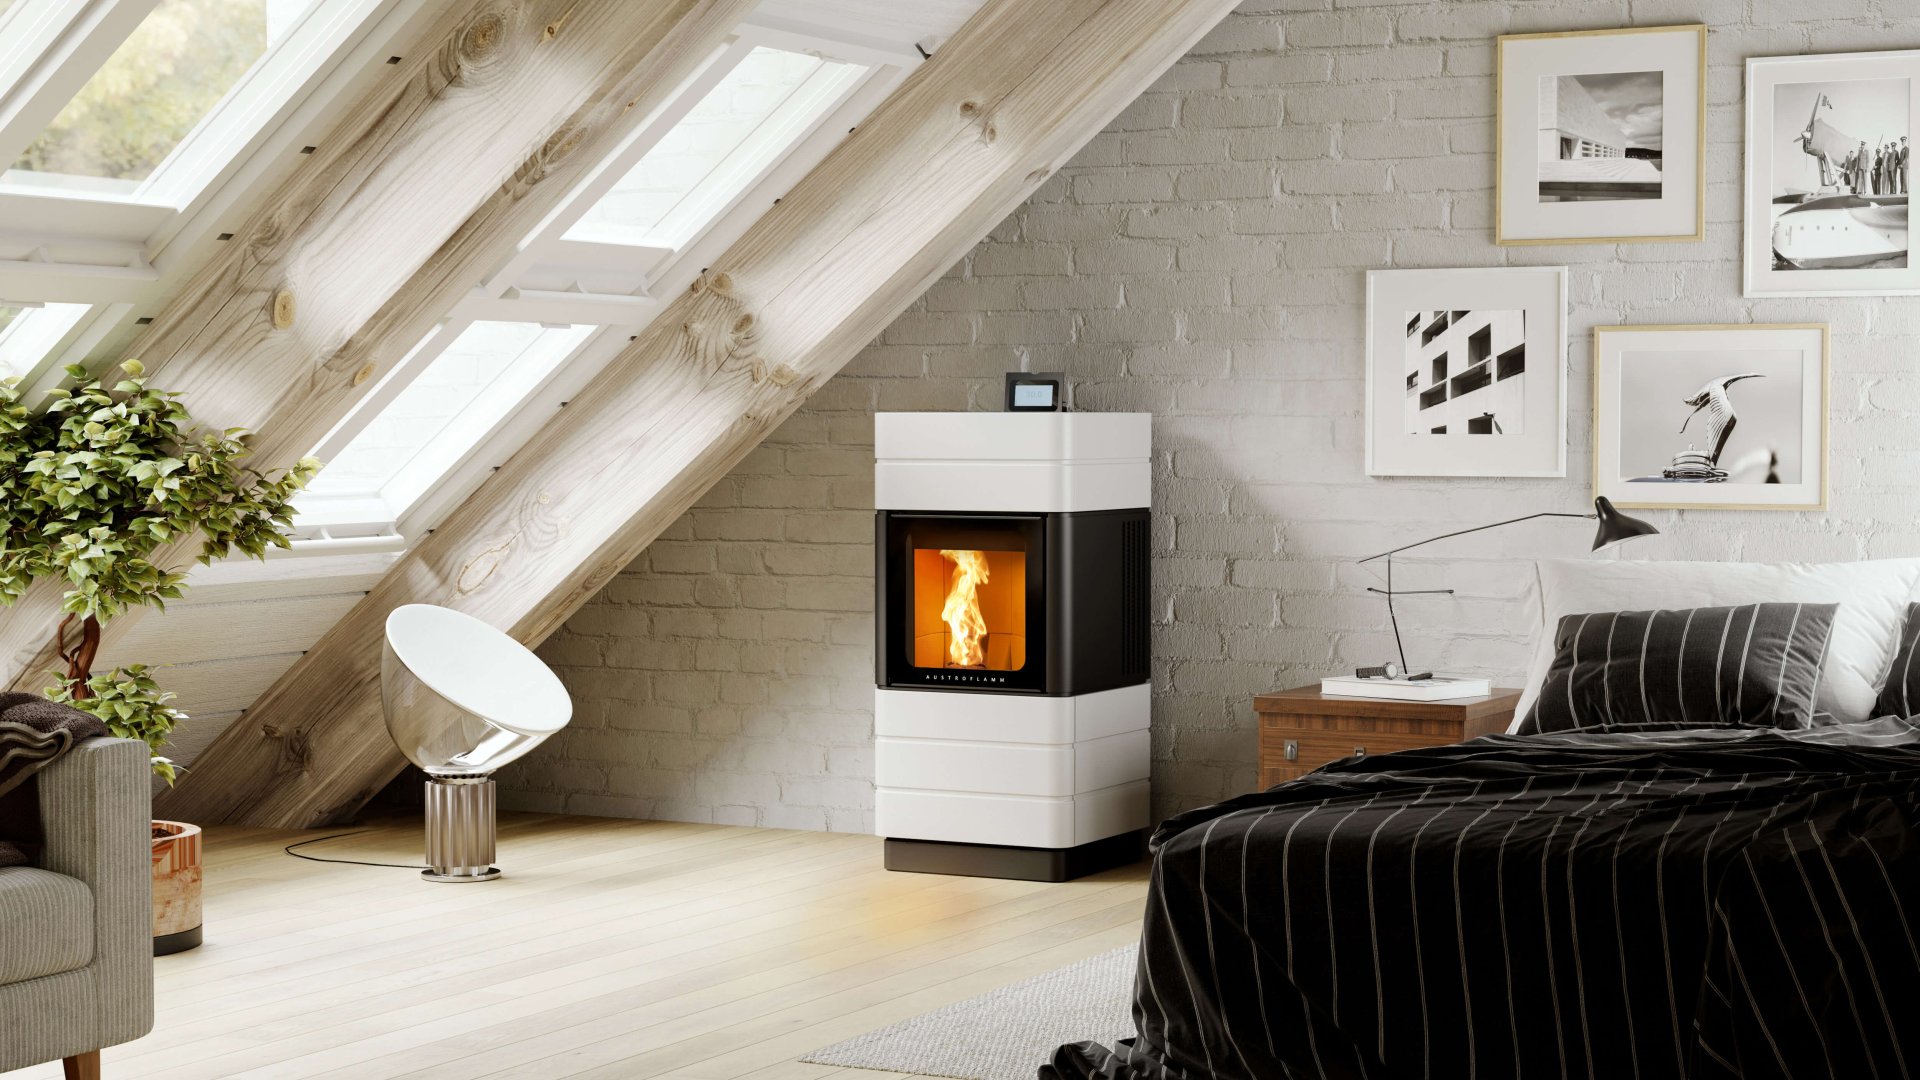 Perry pellet stove ambiance photo with ceramic cladding bright white